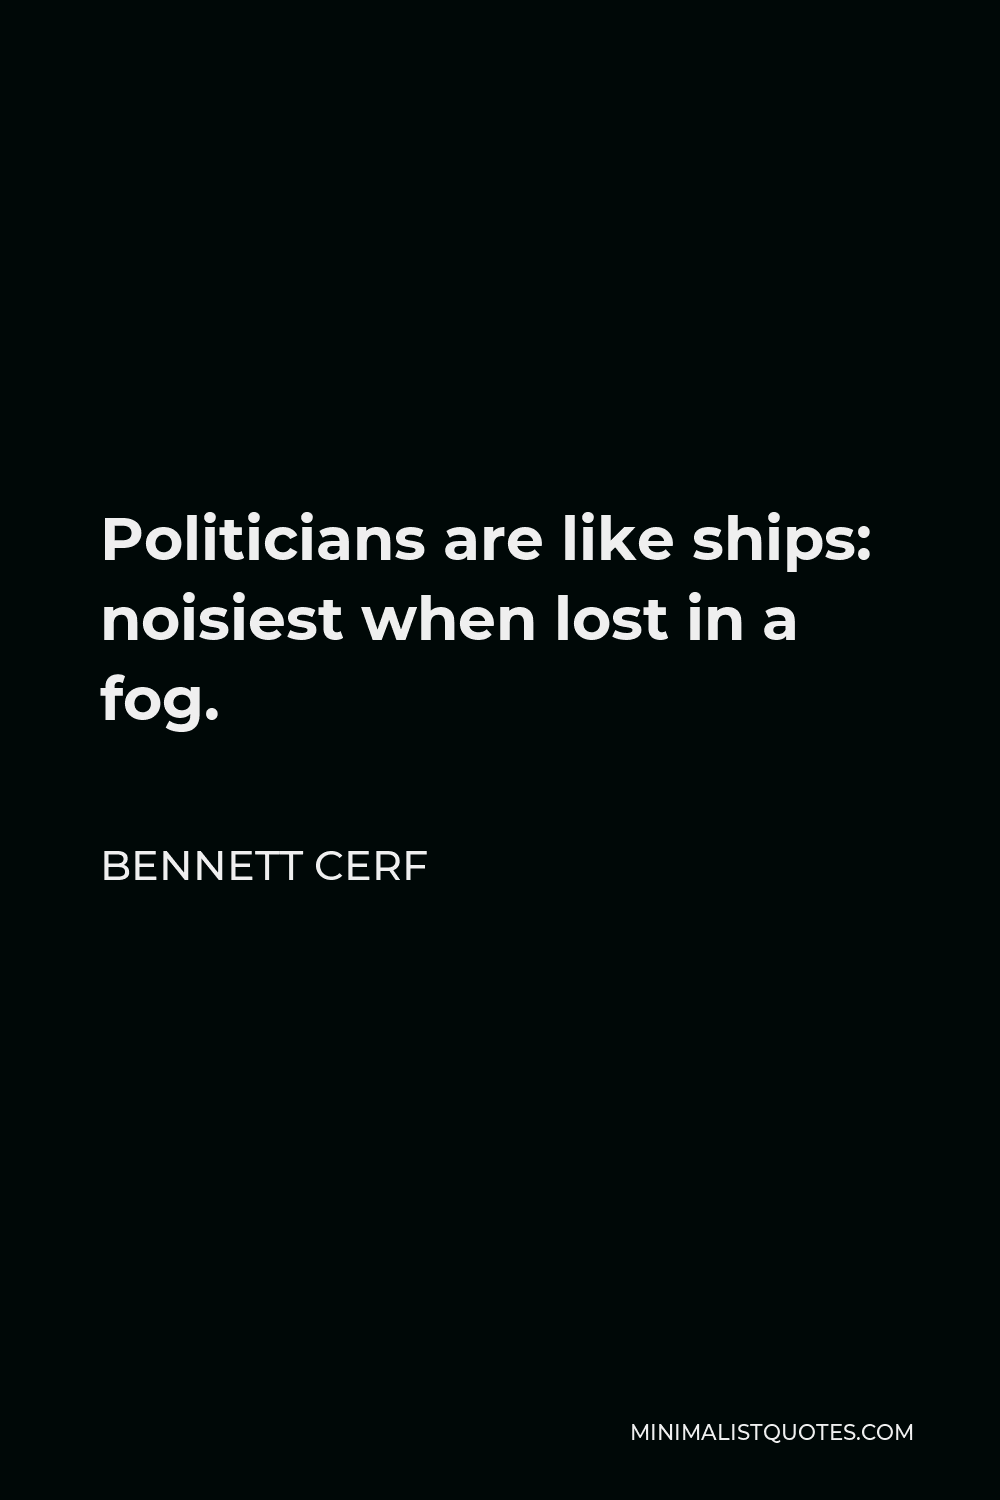 Bennett Cerf Quote - Politicians are like ships: noisiest when lost in a fog.